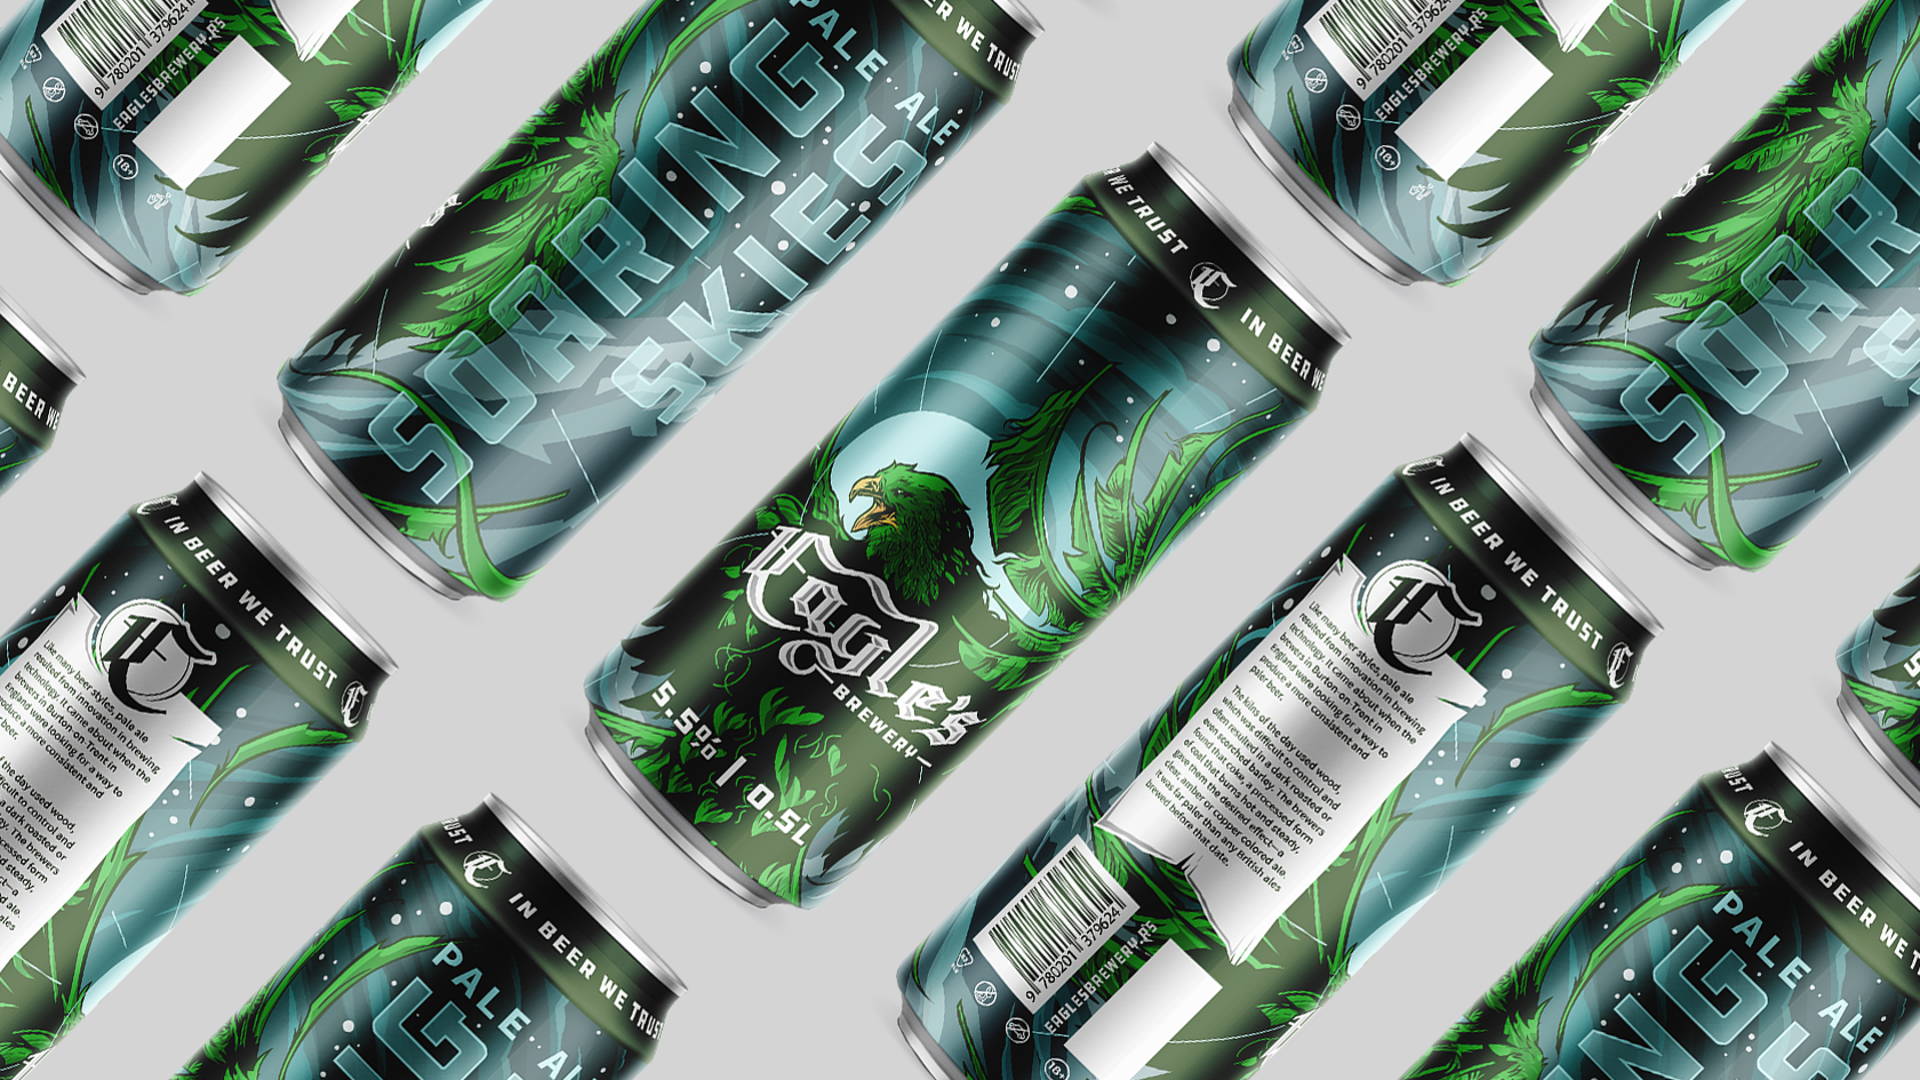 Featured image for This Eagle's Brewery Packaging Concept Is Comic Book Cool